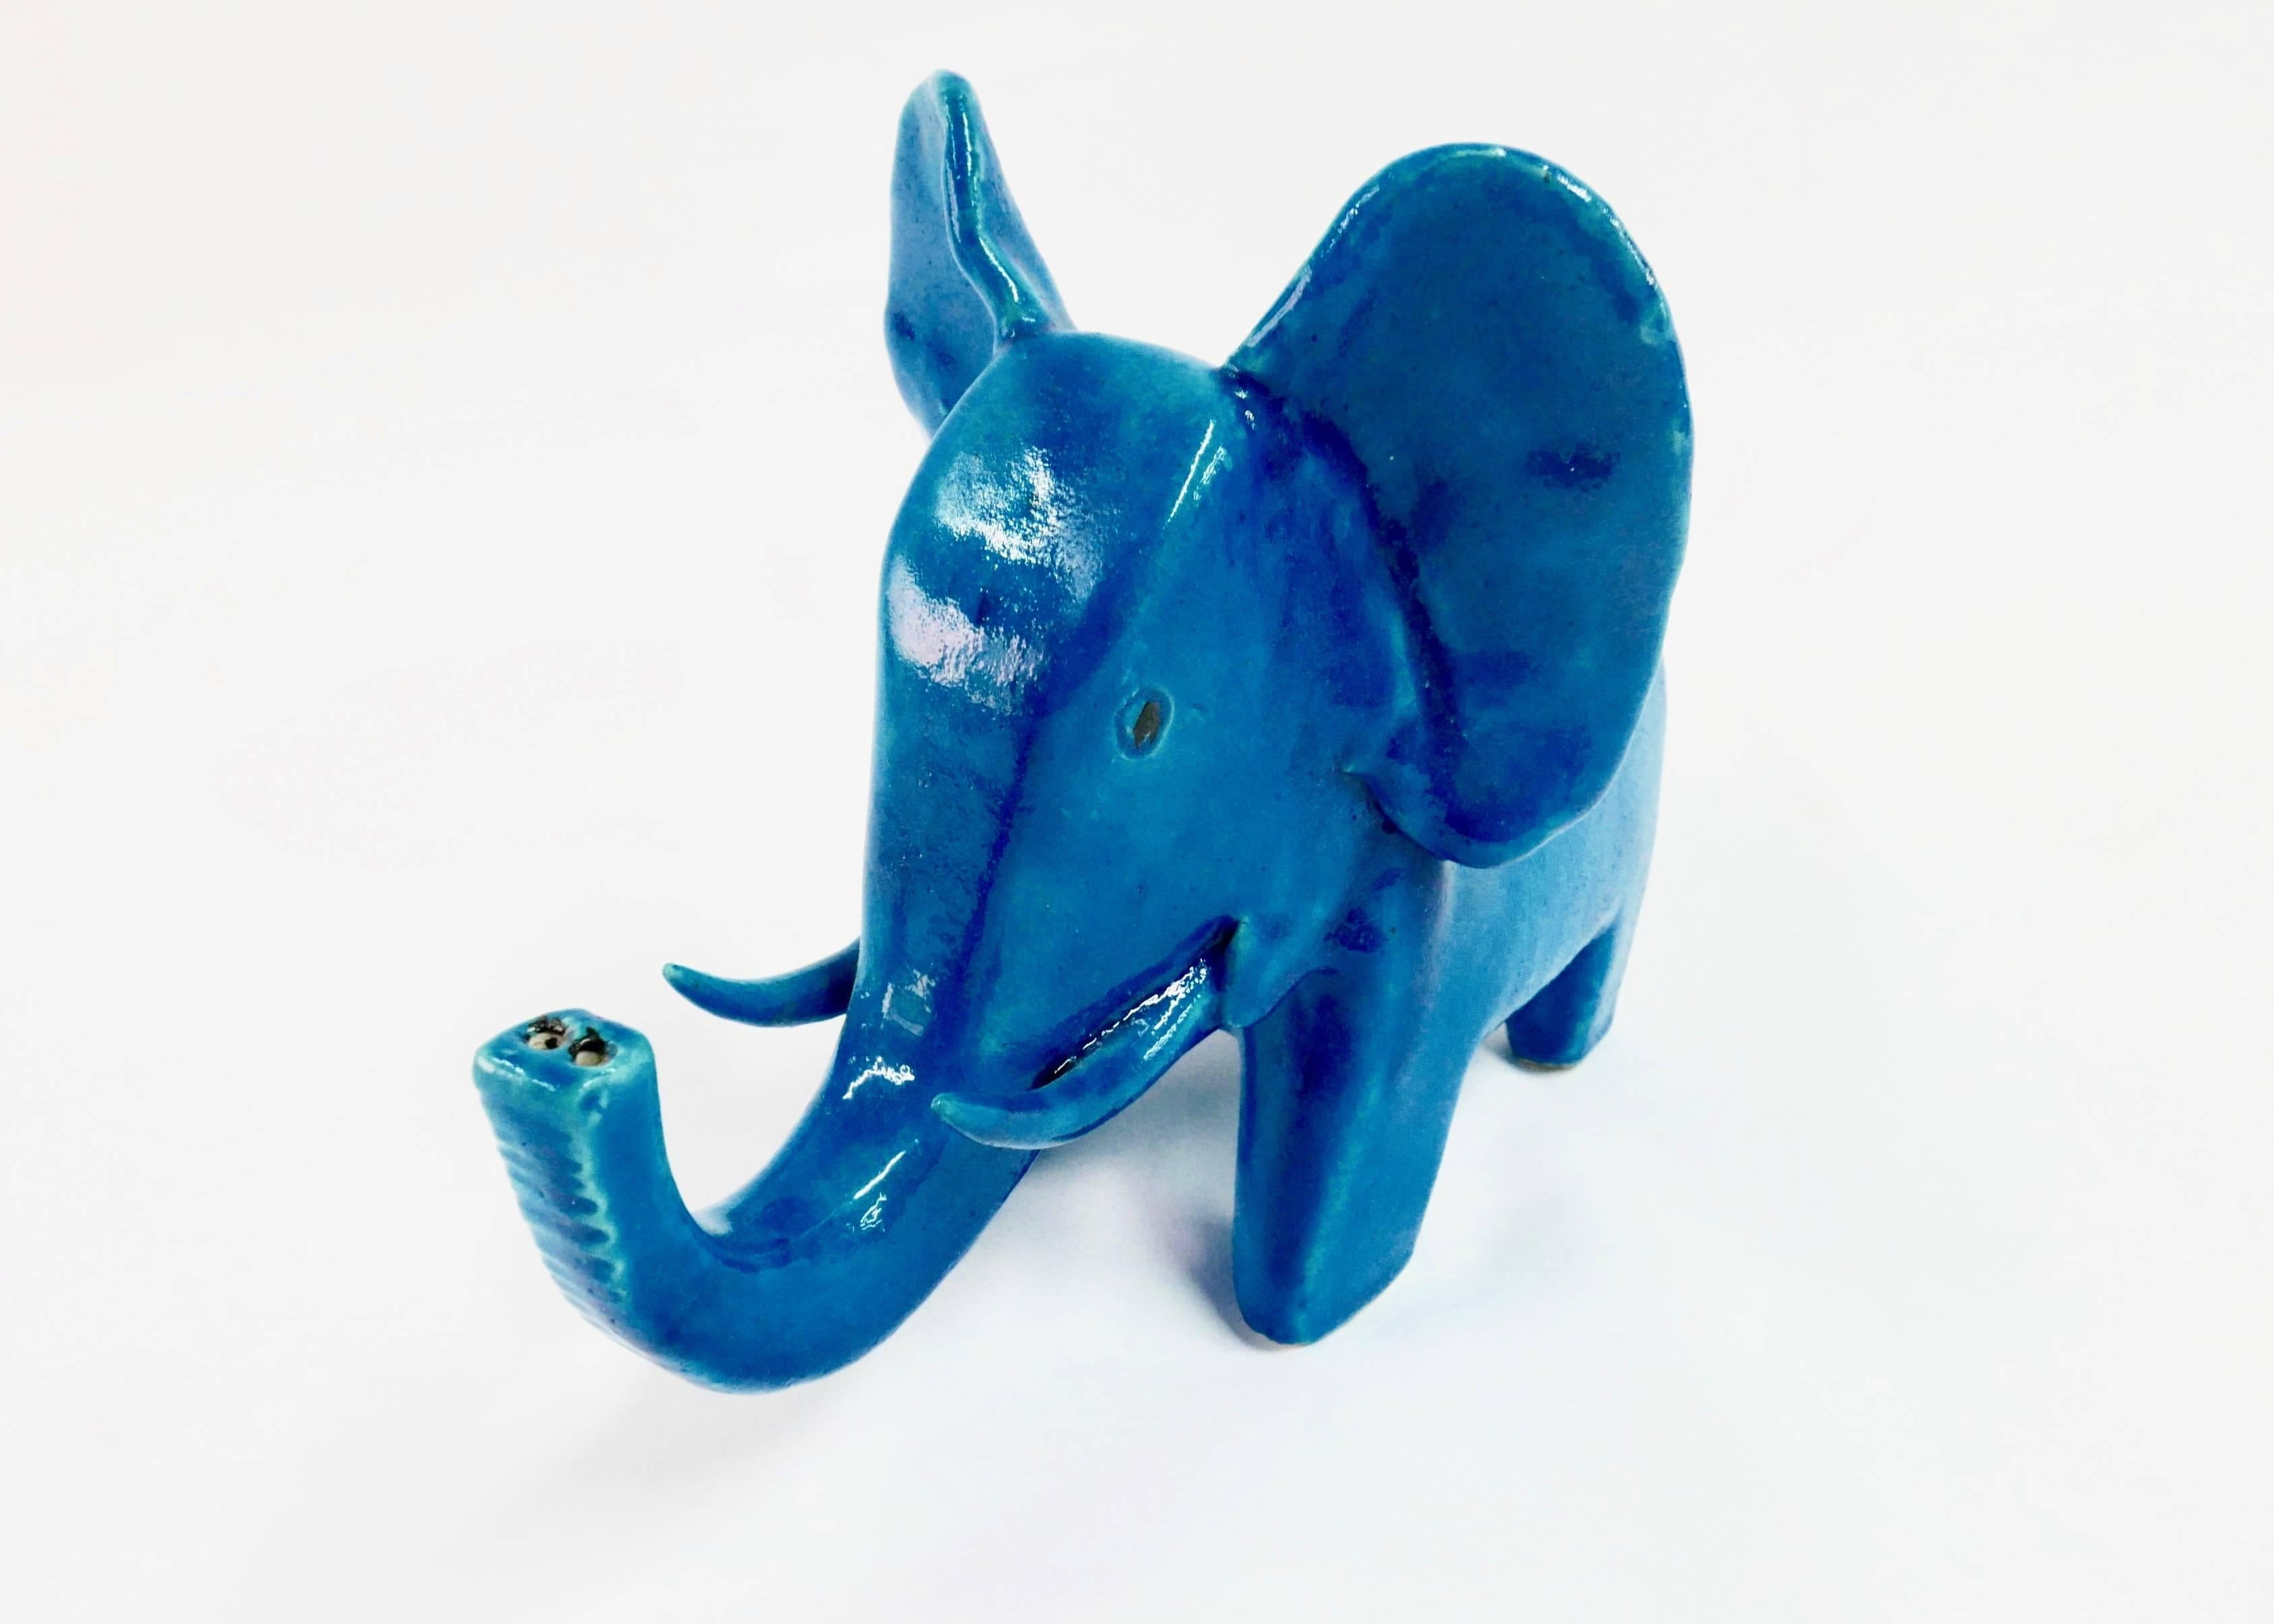 Bright blue elephant by Bruno Gambone. Produced by the artist in the late 1950s and signed Gambone, Italy.